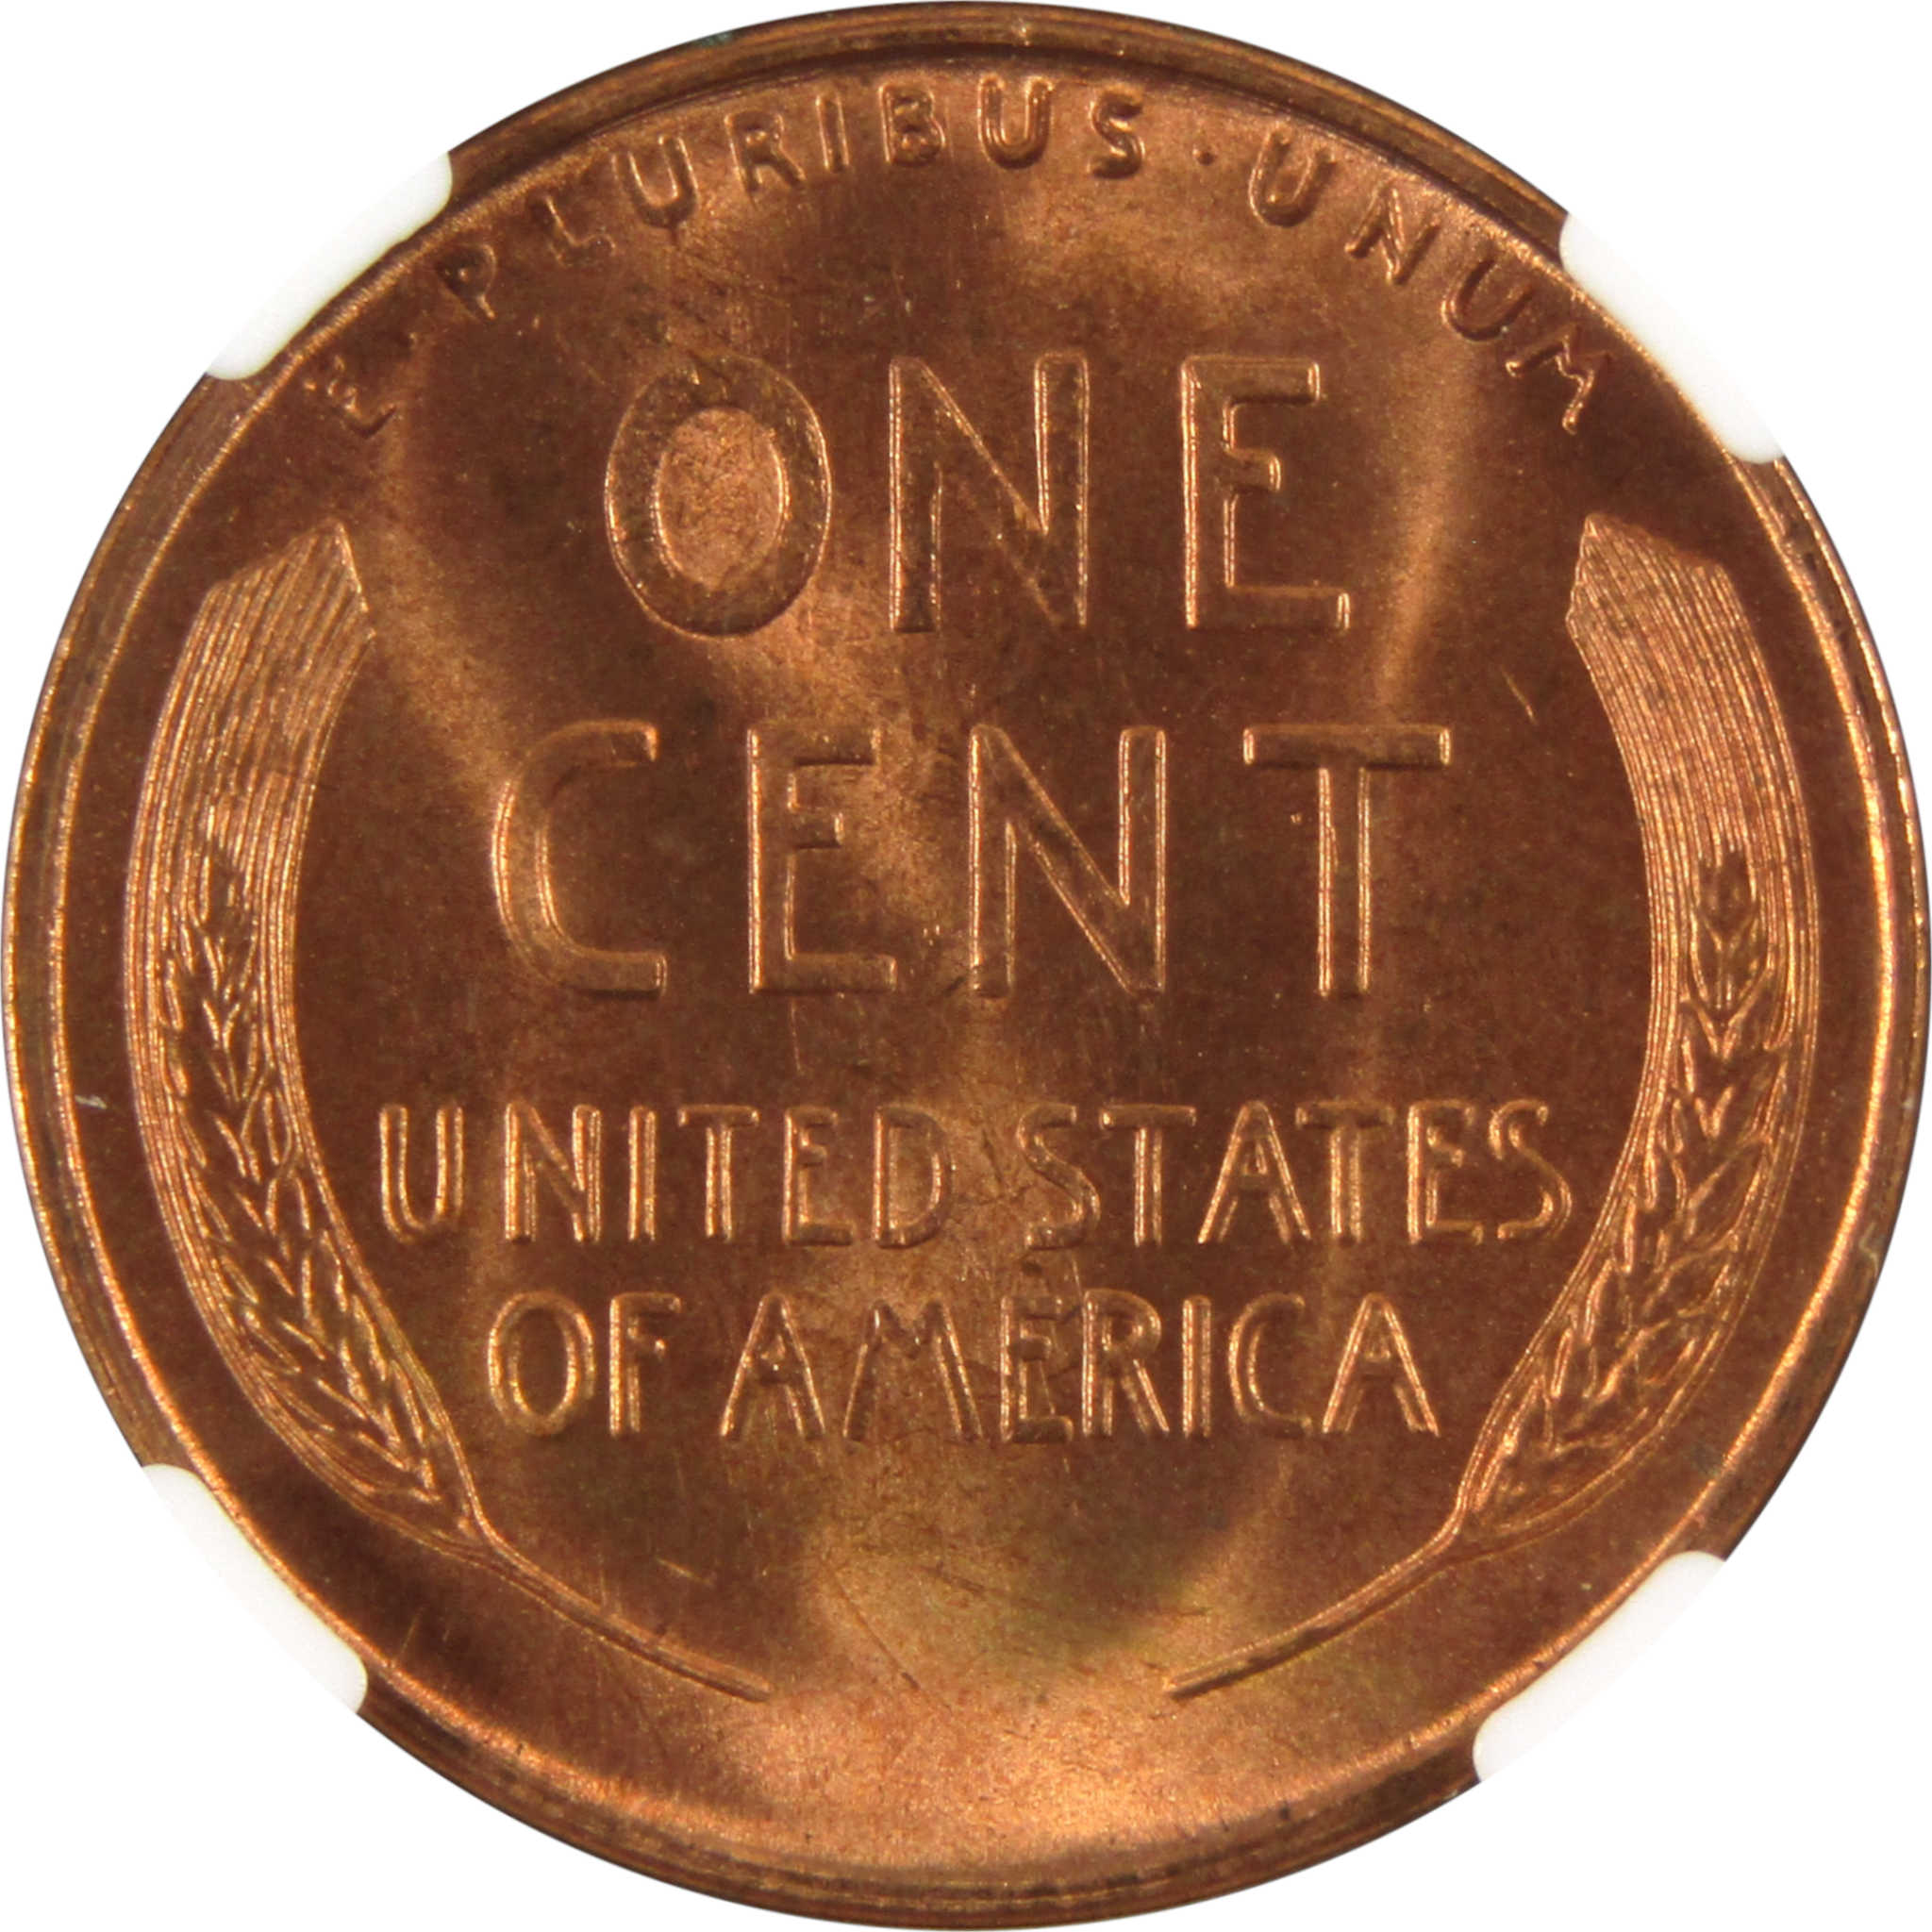 1947 S Lincoln Wheat Cent MS 67 RD NGC Penny 1c Uncirculated SKU:I9696